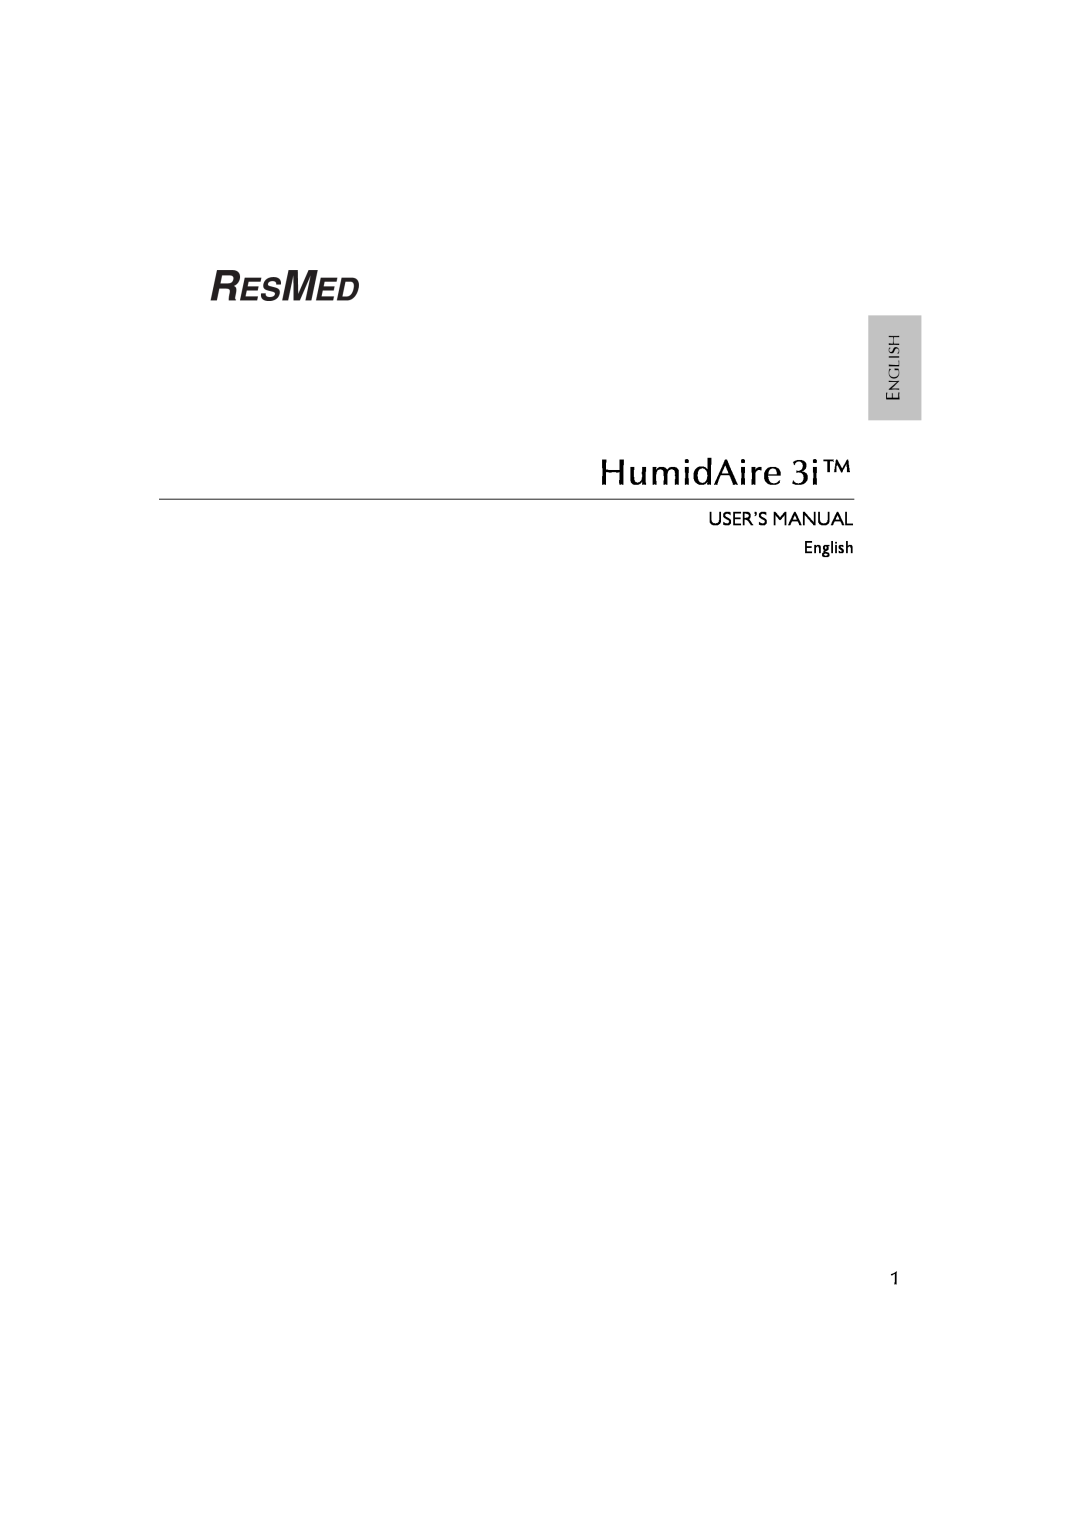 ResMed 3I user manual HumidAire 